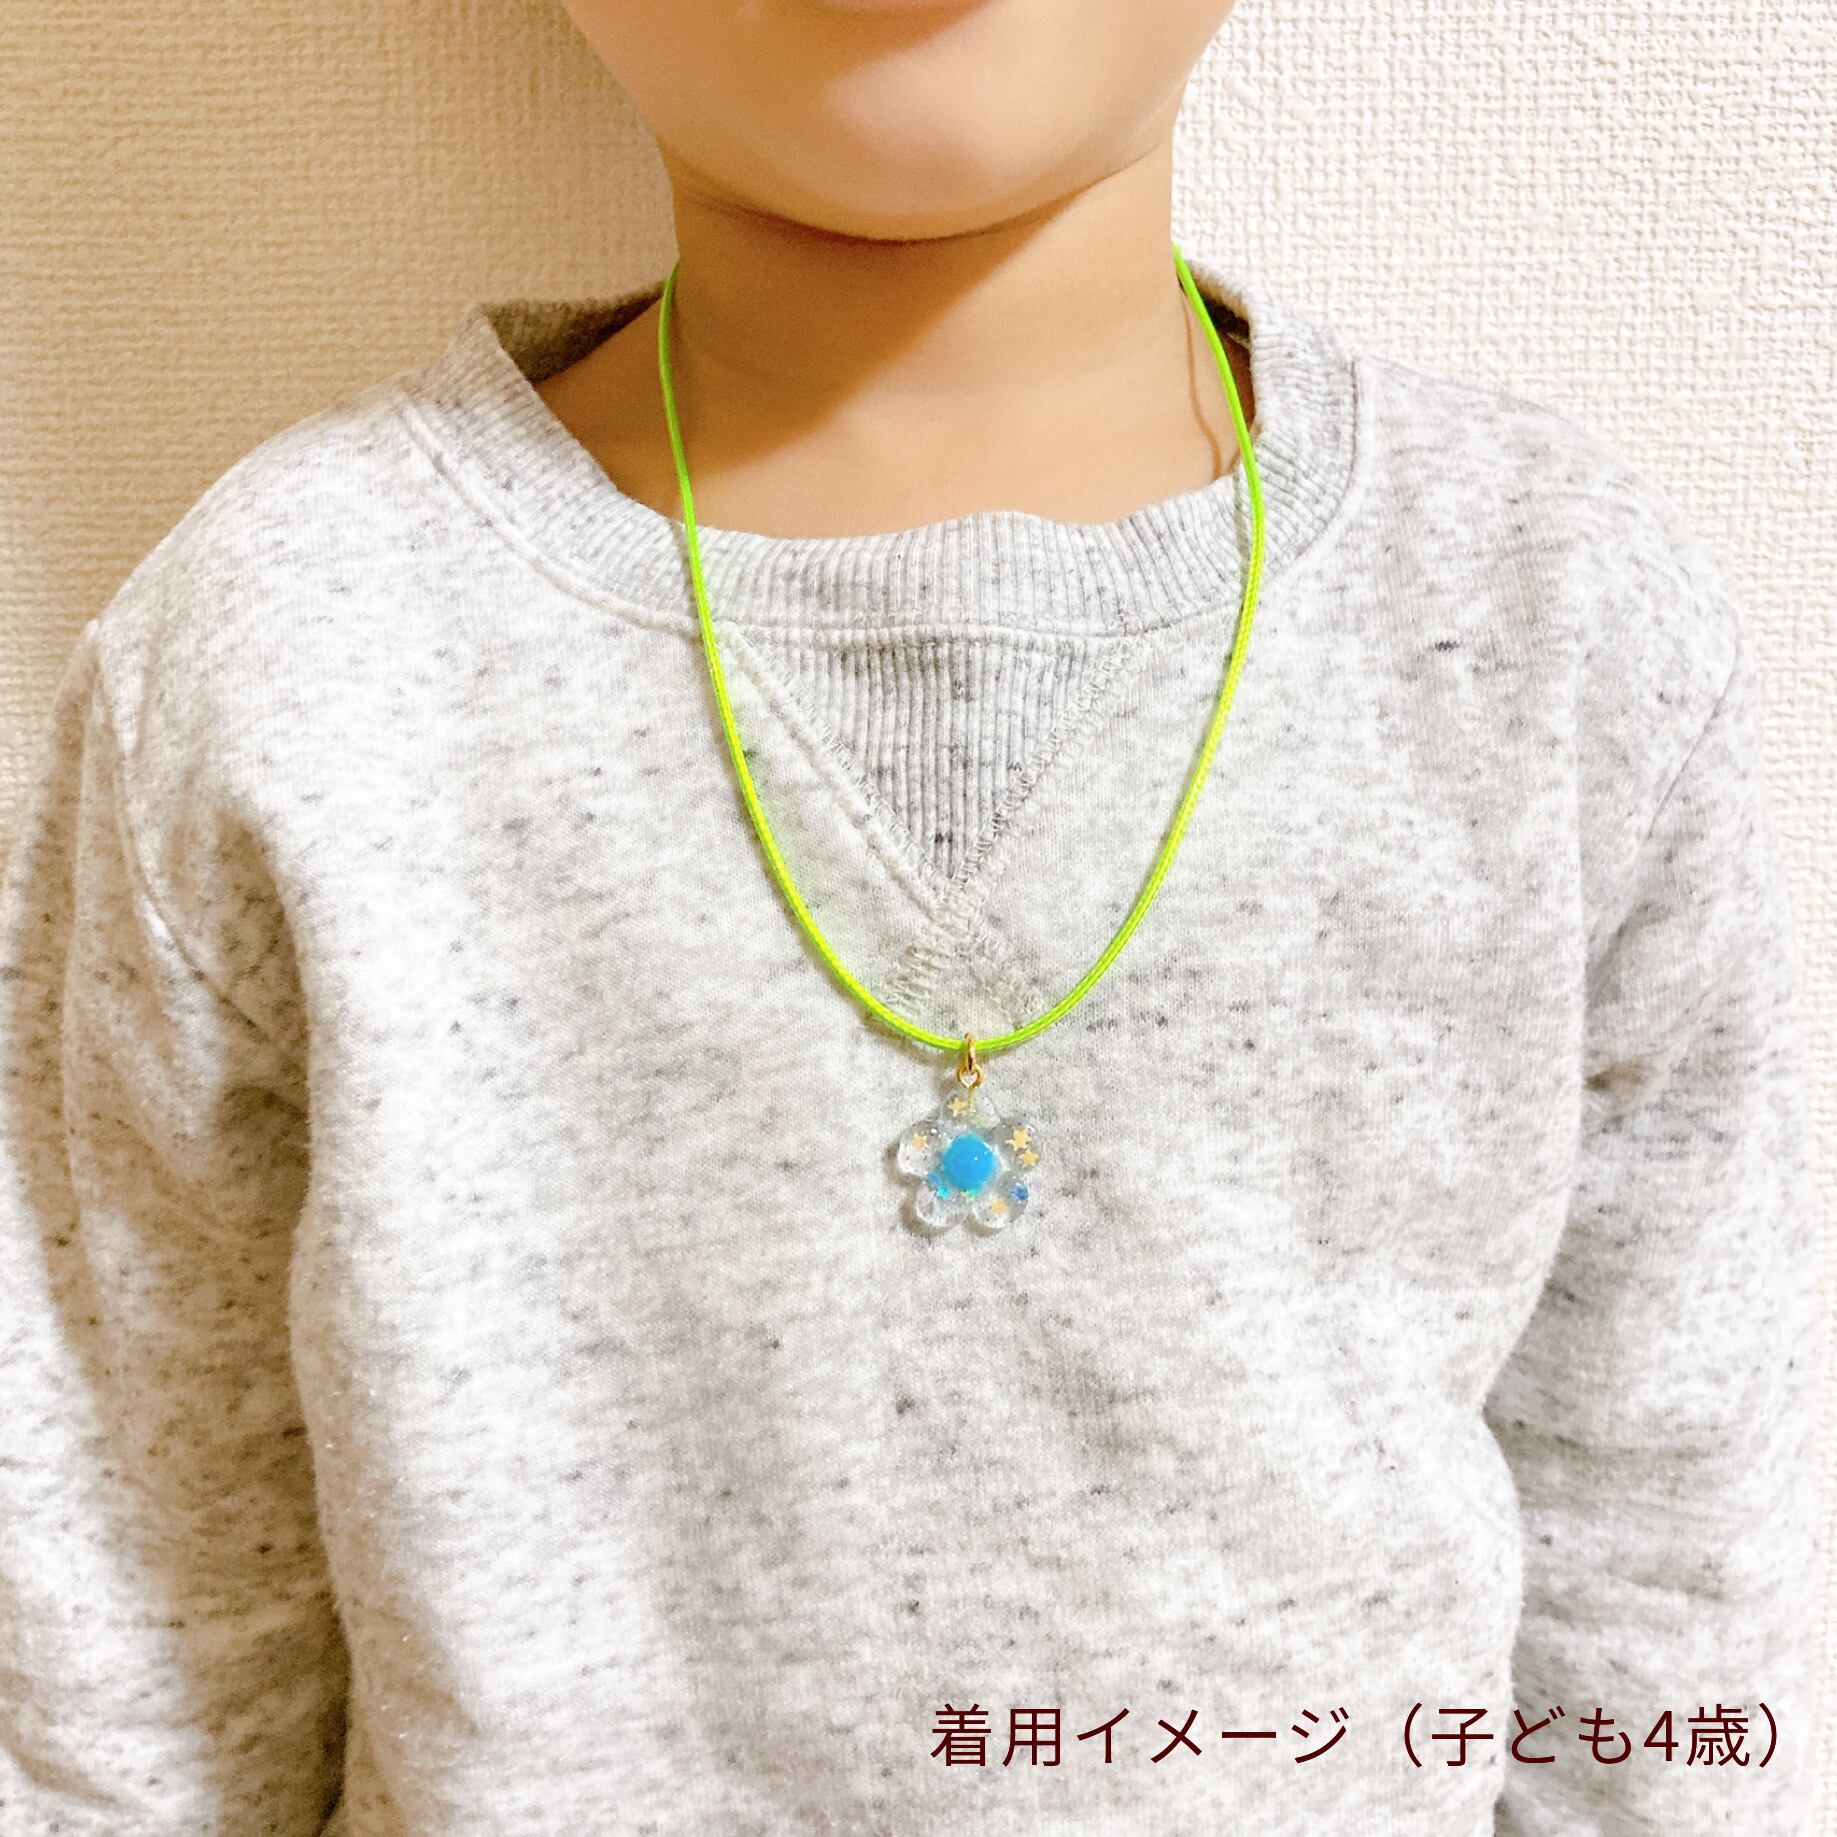 little   necklace  （ c - 2 ）  キッズネックレス